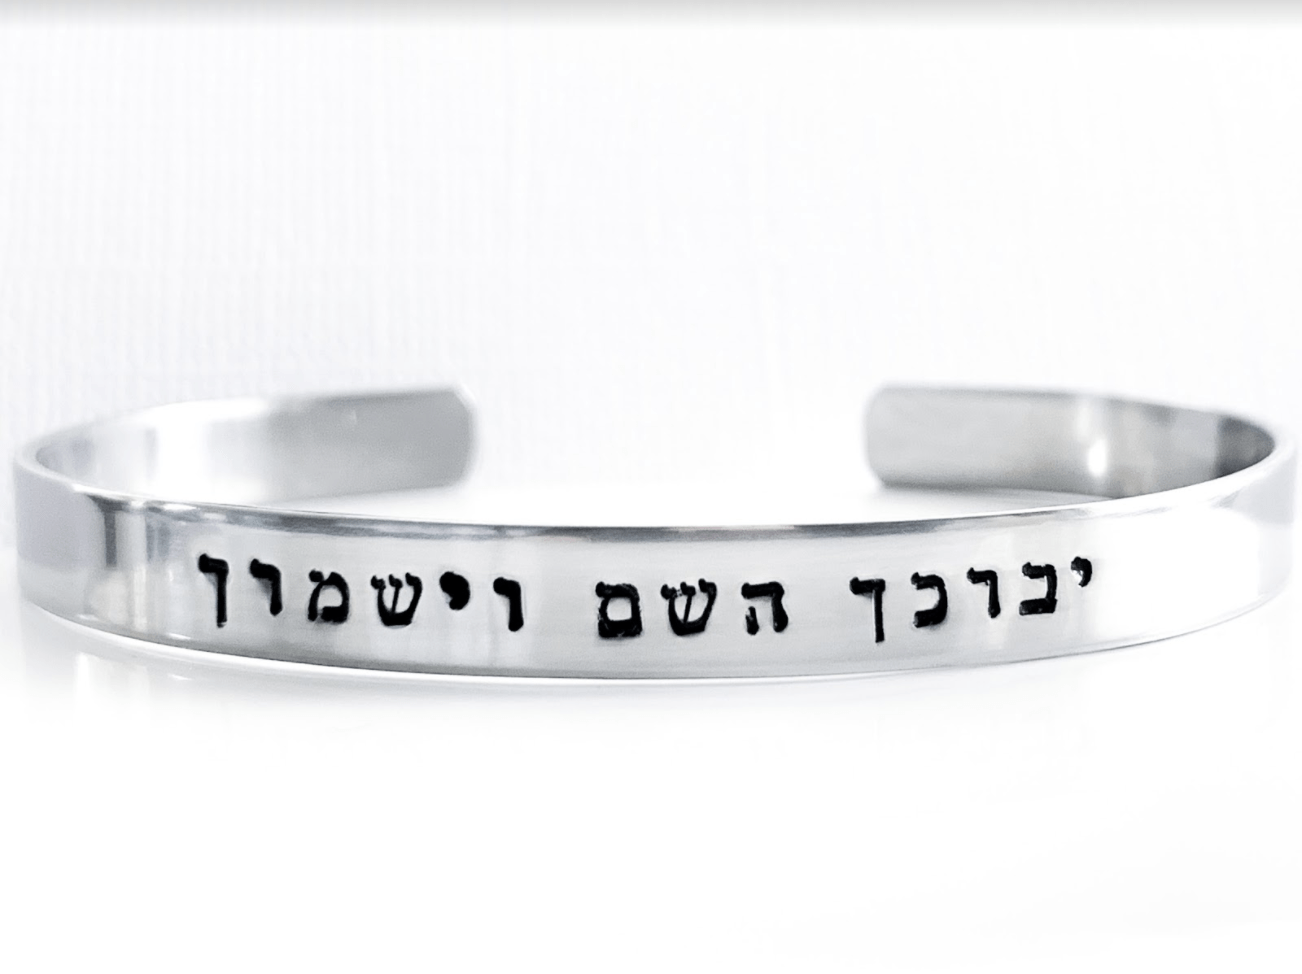 Everything Beautiful Bracelets May HaShem Bless You Hebrew Bracelet - Brass, Copper or Steel